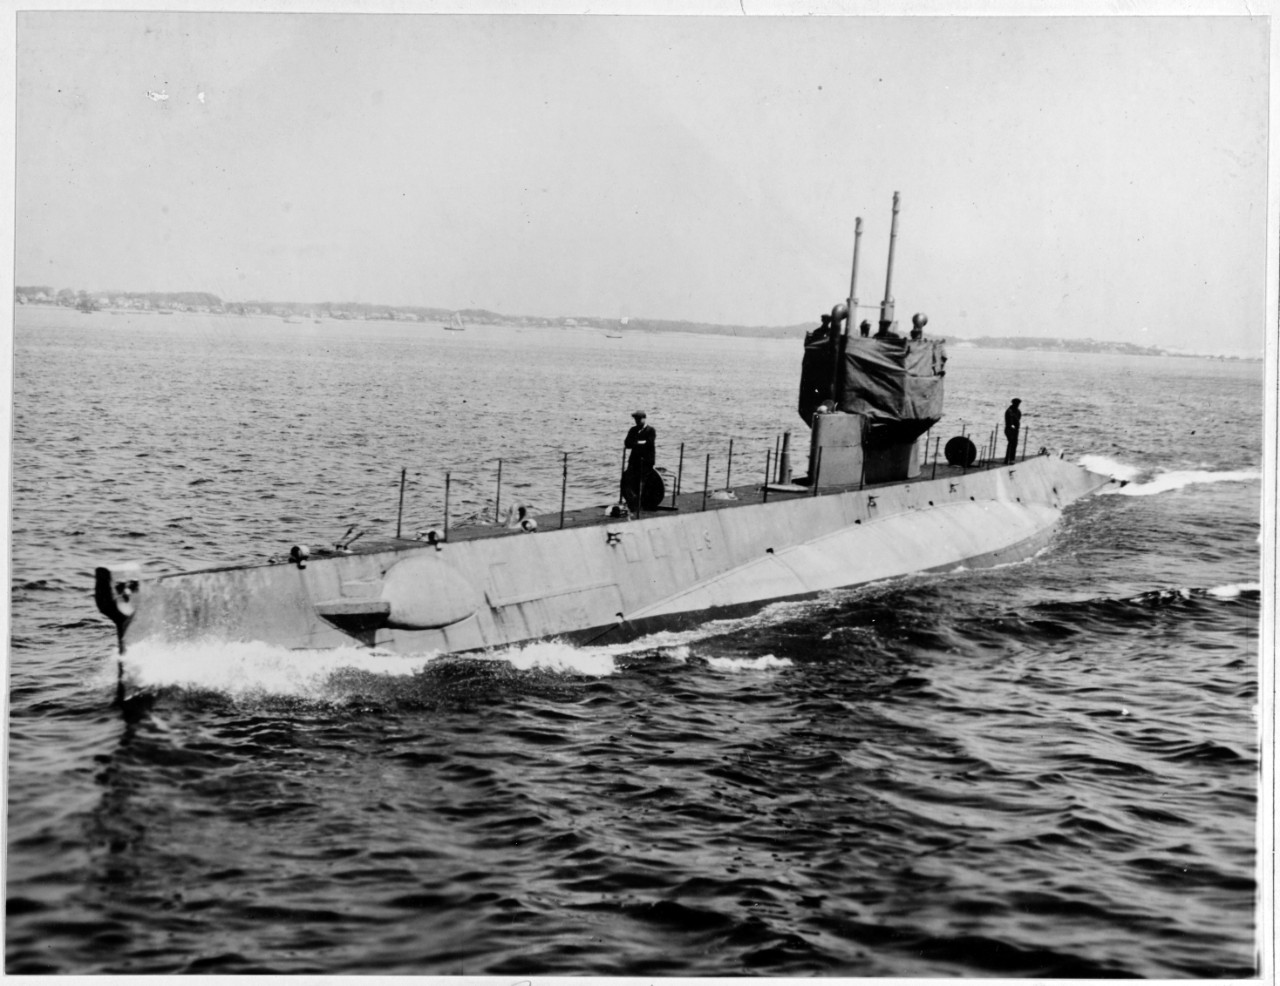 L-9 underway, probably while running trials in 1916. (Naval History and Heritage Command Photograph NH 63383)